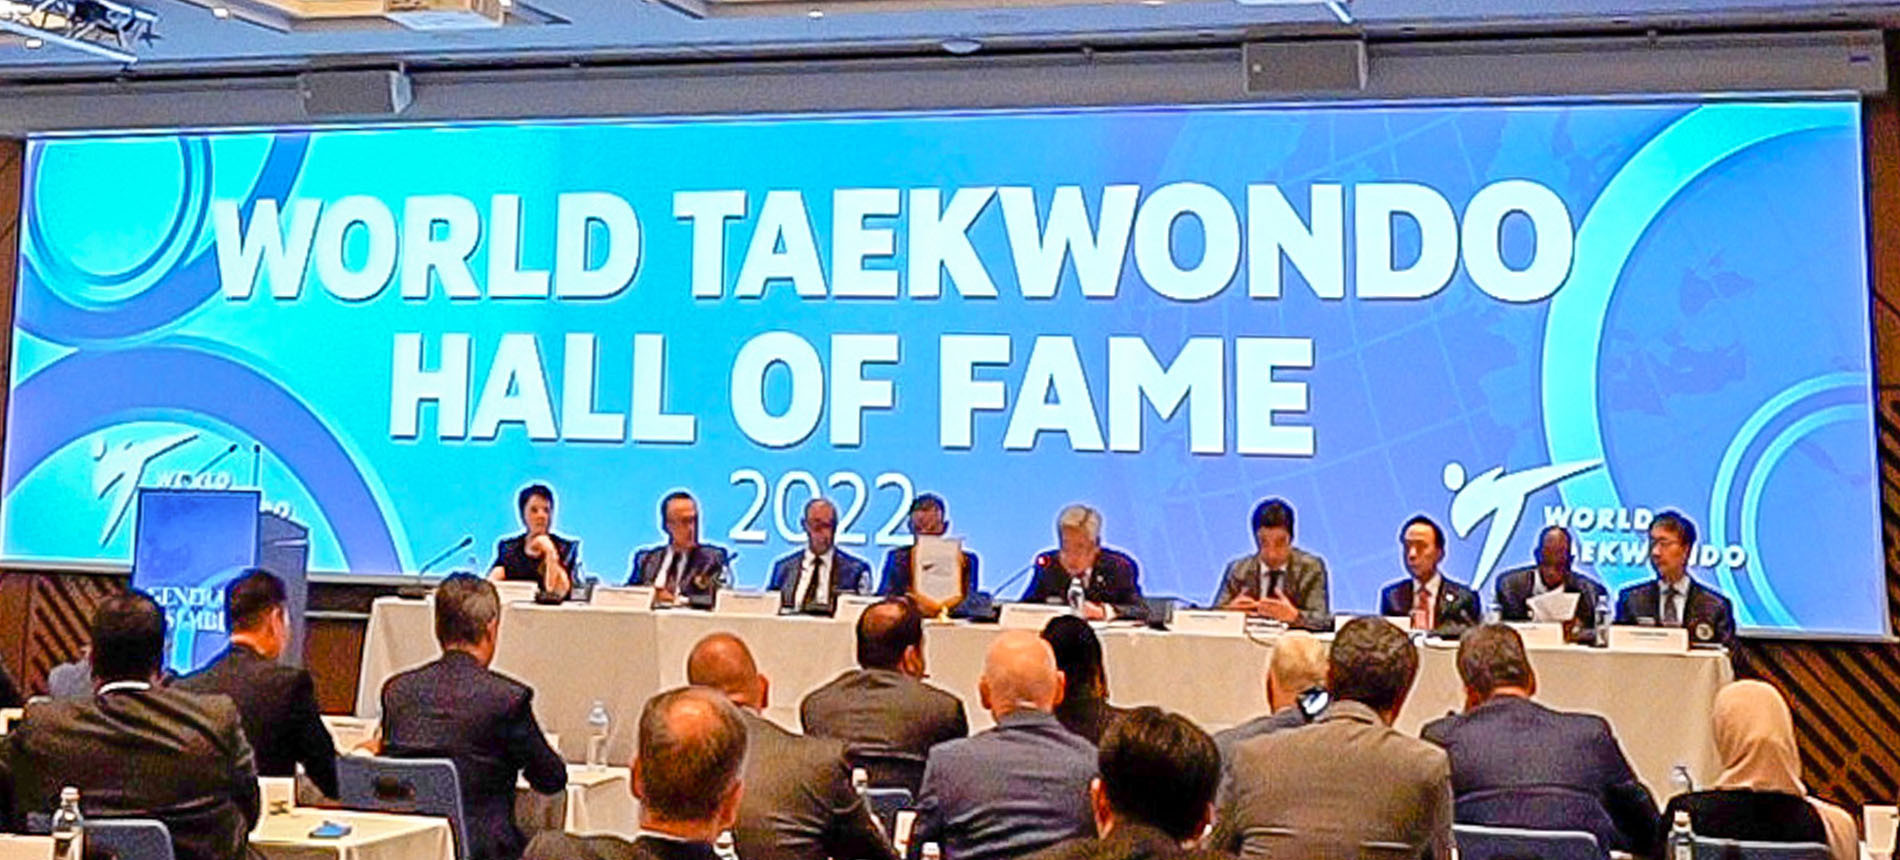 Six individuals were inducted to the World Taekwondo Hall of Fame at the General Assembly in Sofia ©World Taekwondo